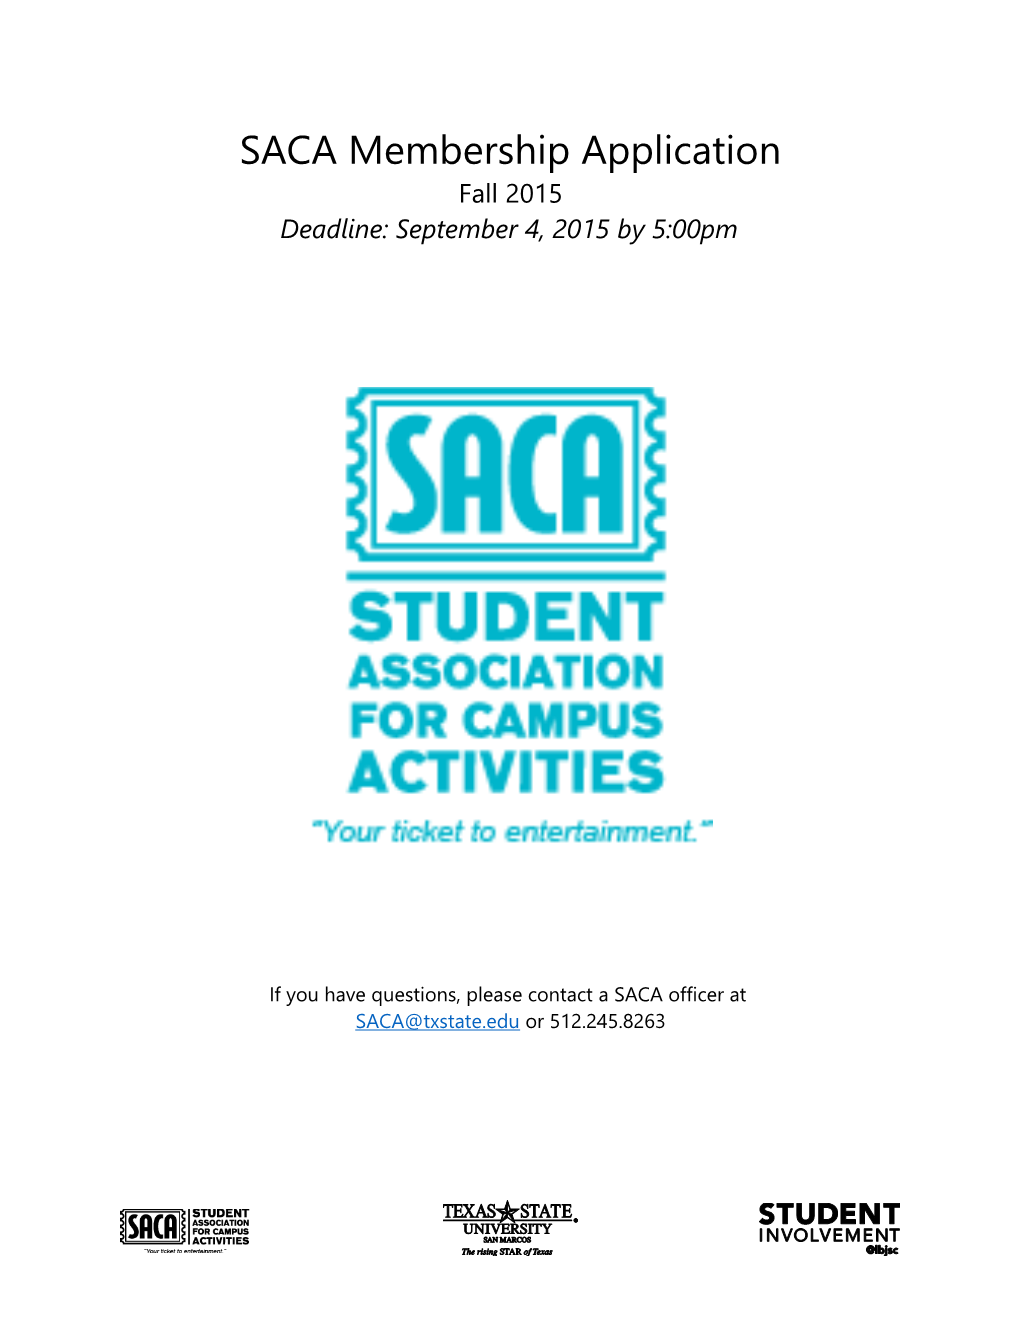 If You Have Questions, Please Contact a SACA Officer At